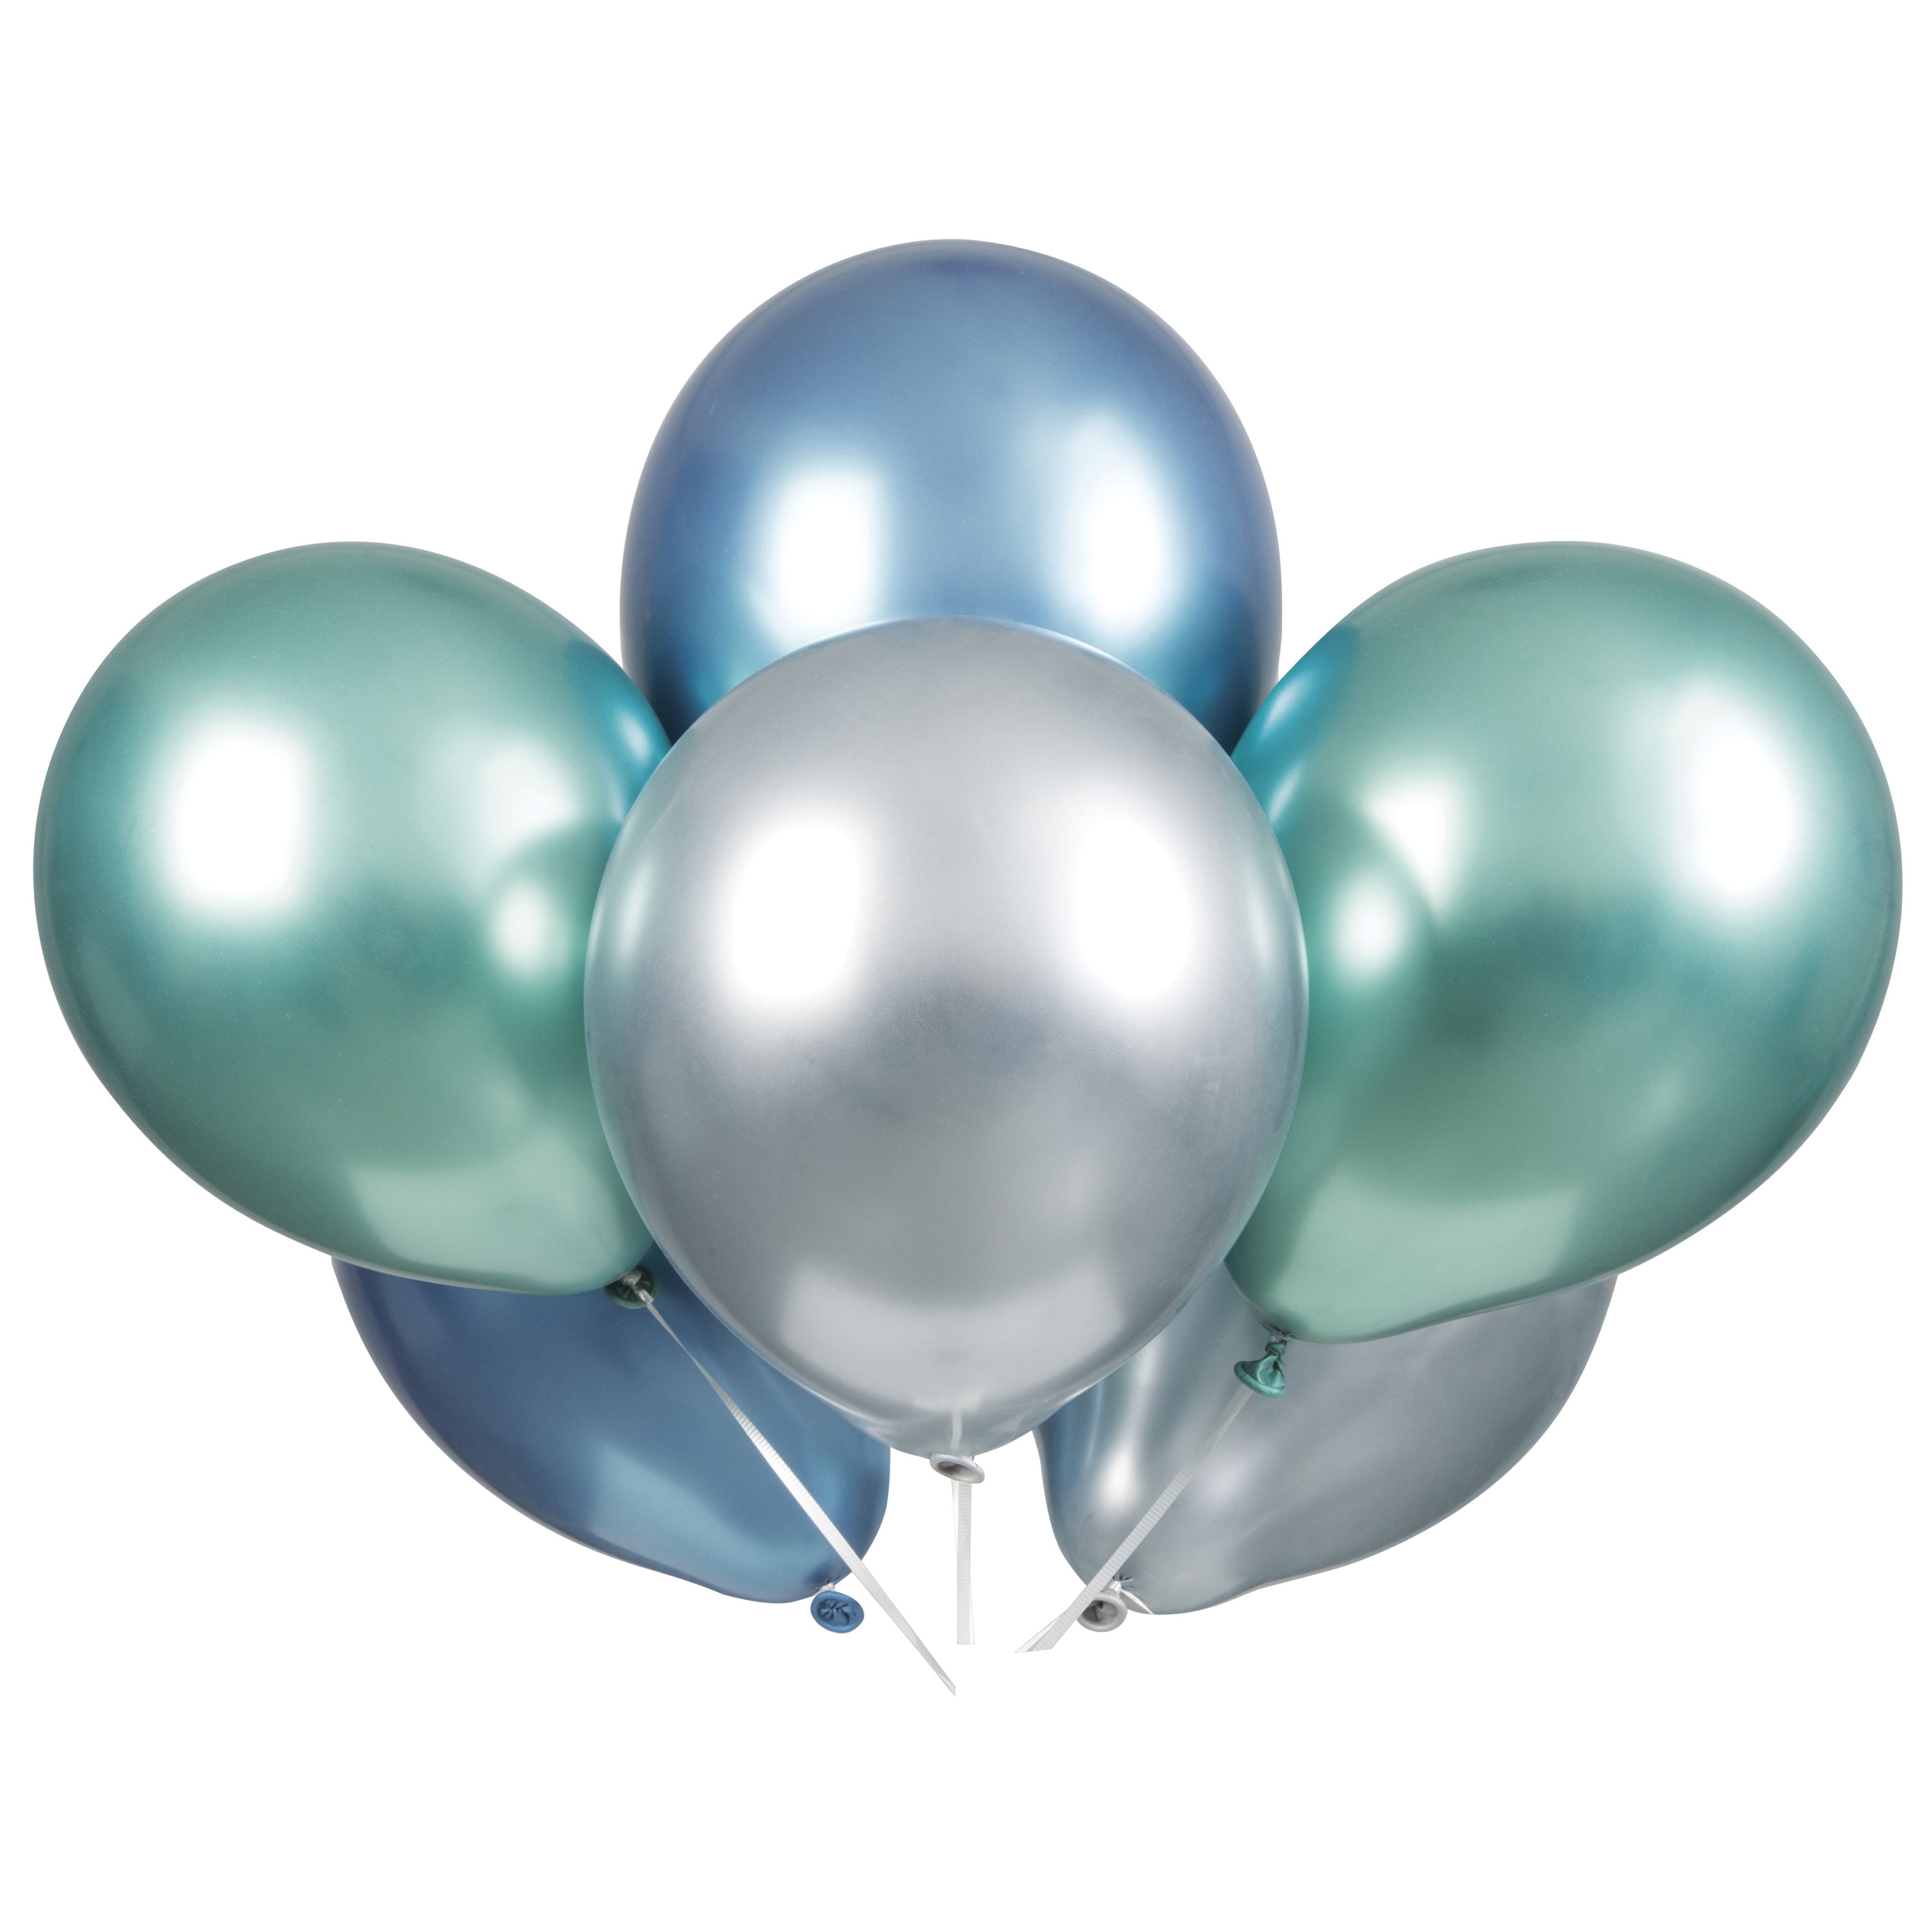 ALL TYPES OF BALLOONS FOR ALL OCCASIONS,PLAIN,ASSORTED COLOR METALLIC BALLOONS